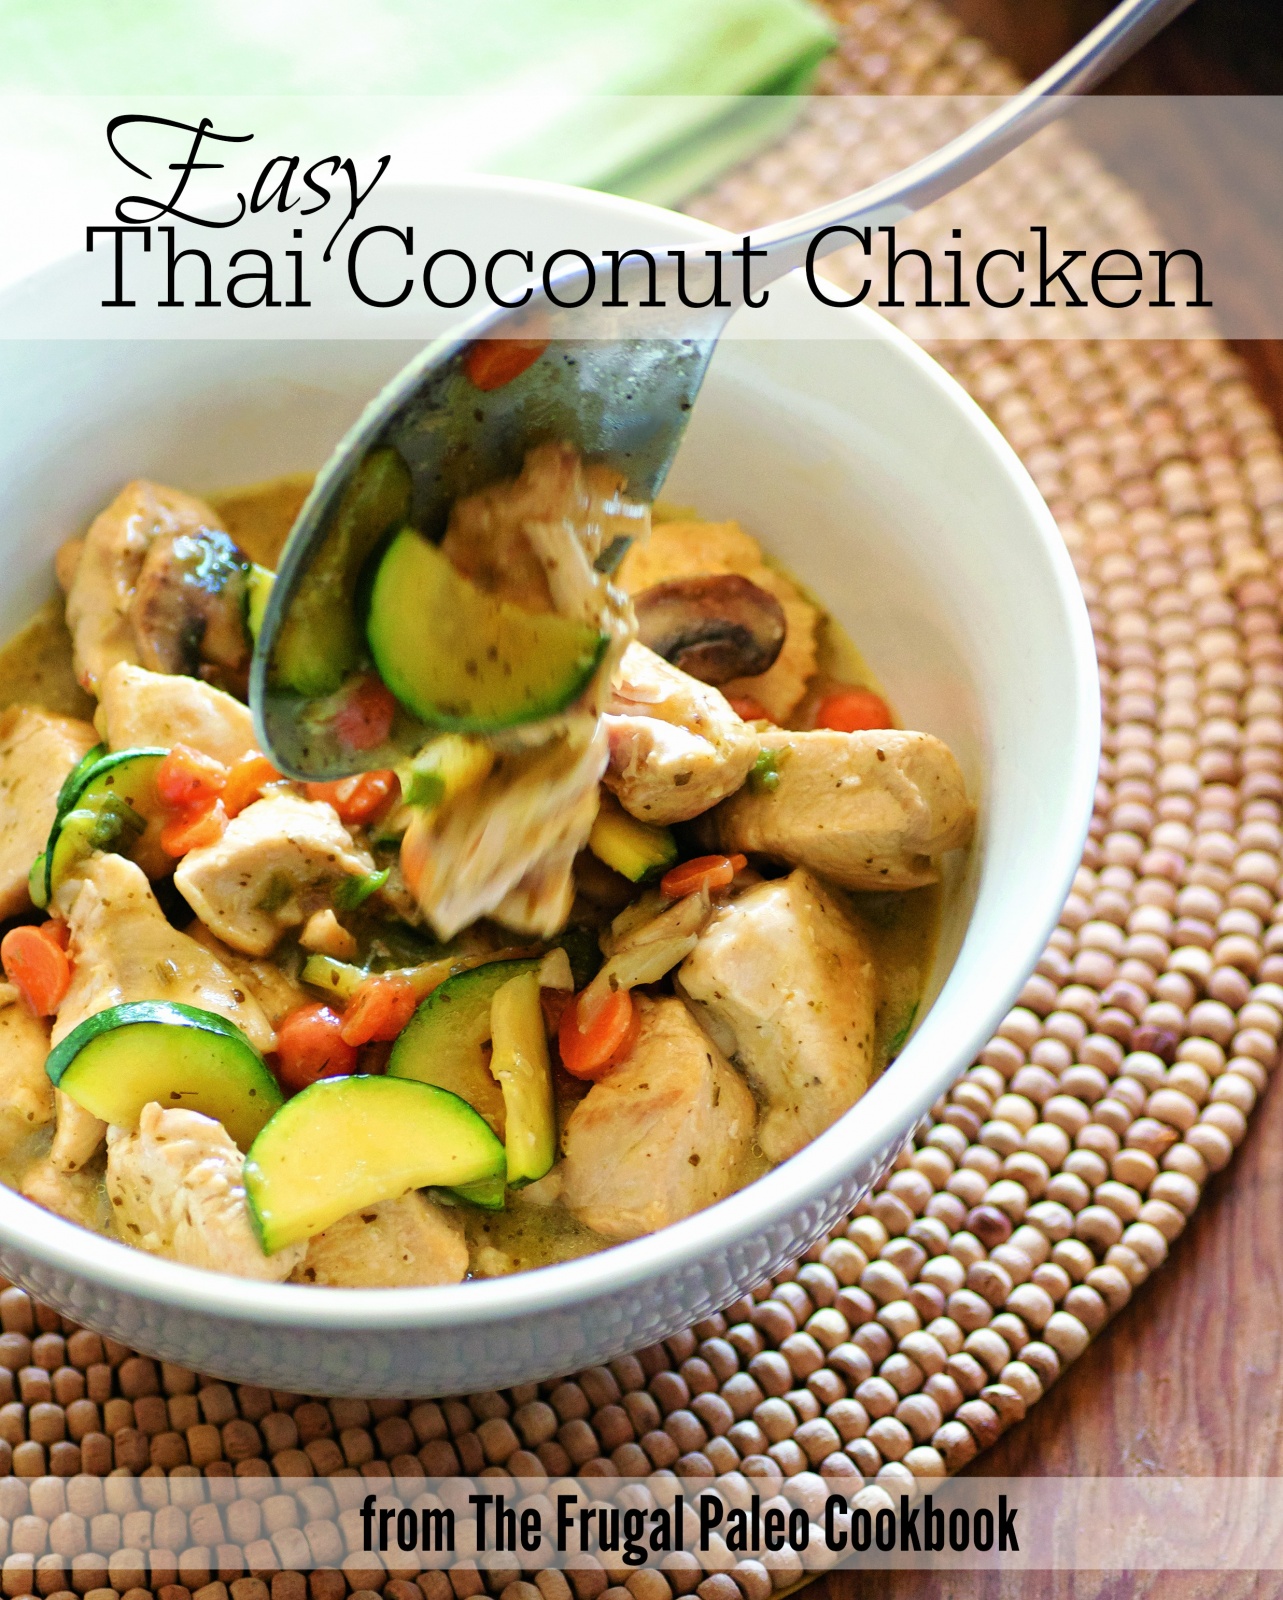 Easy Thai Coconut Chicken from The Frugal Paleo Cookbook ...